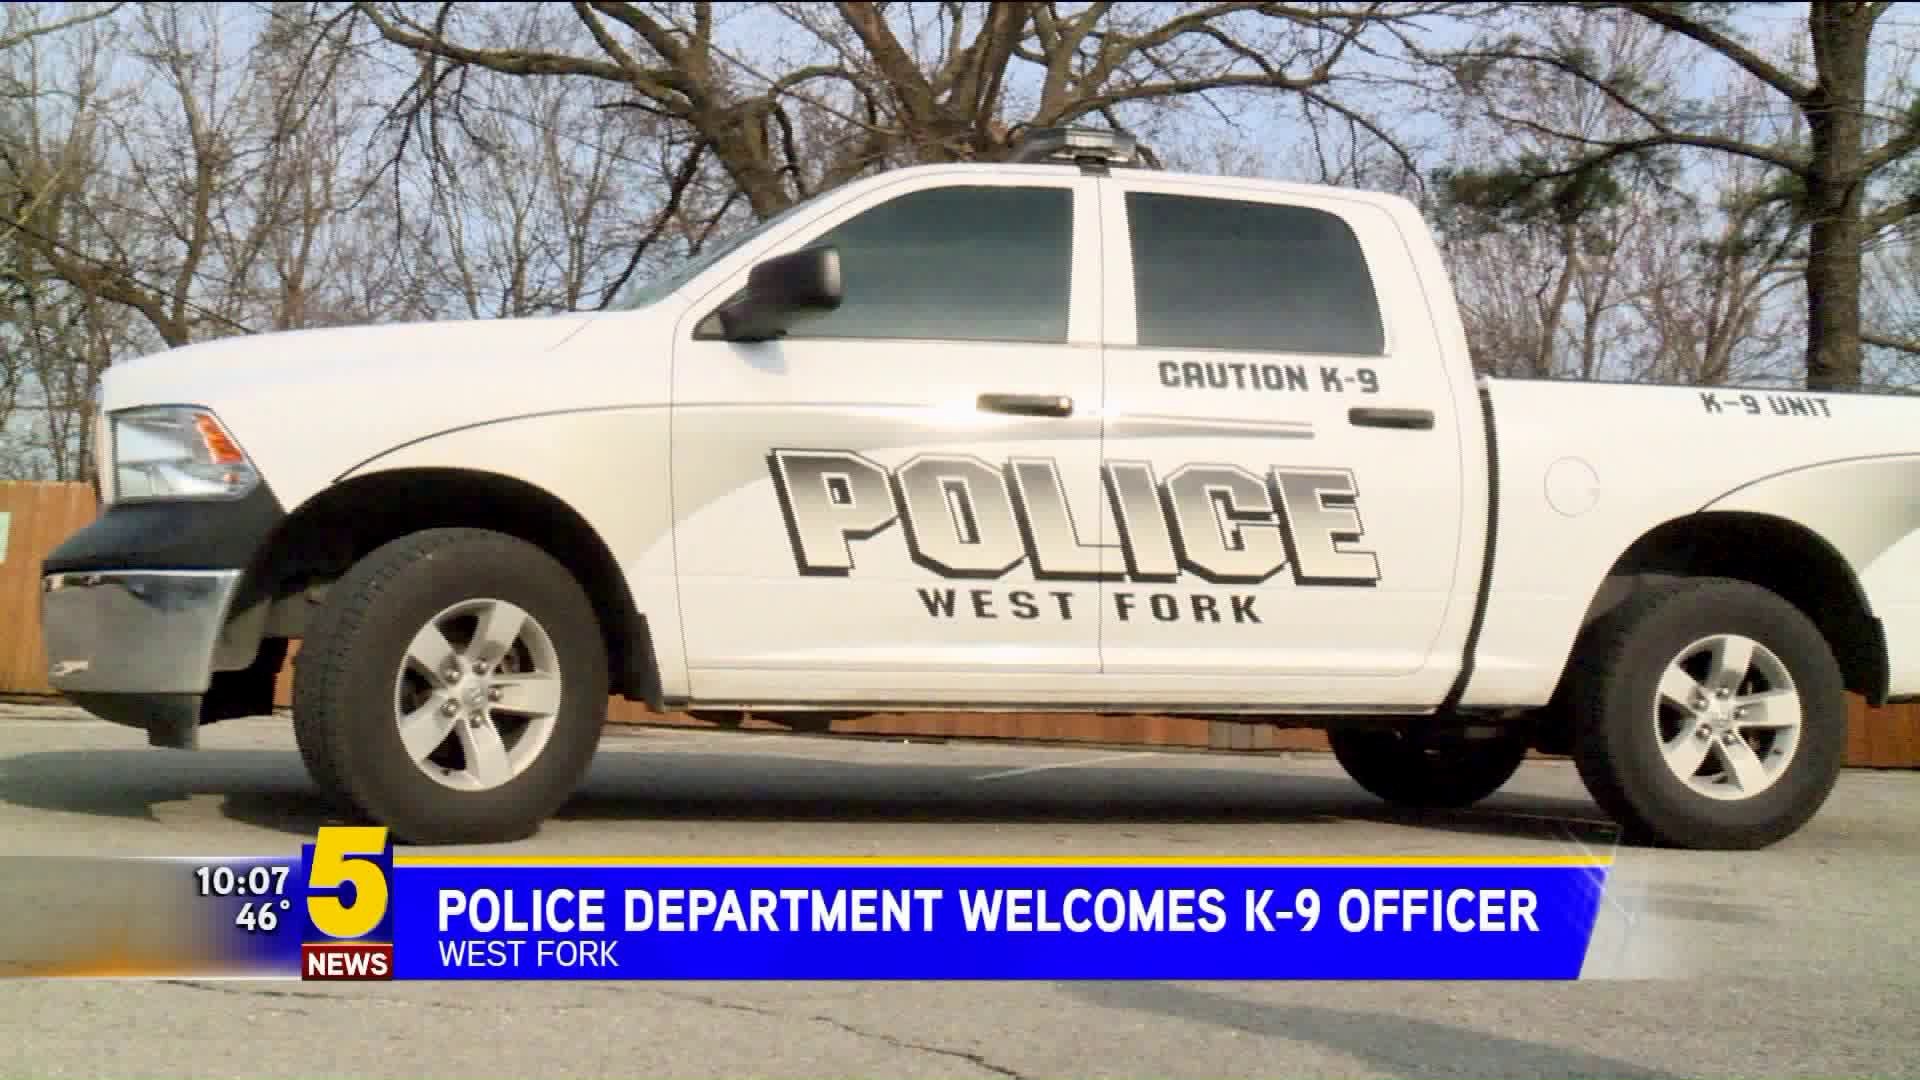 Police Department Welcomes K-9 Officer